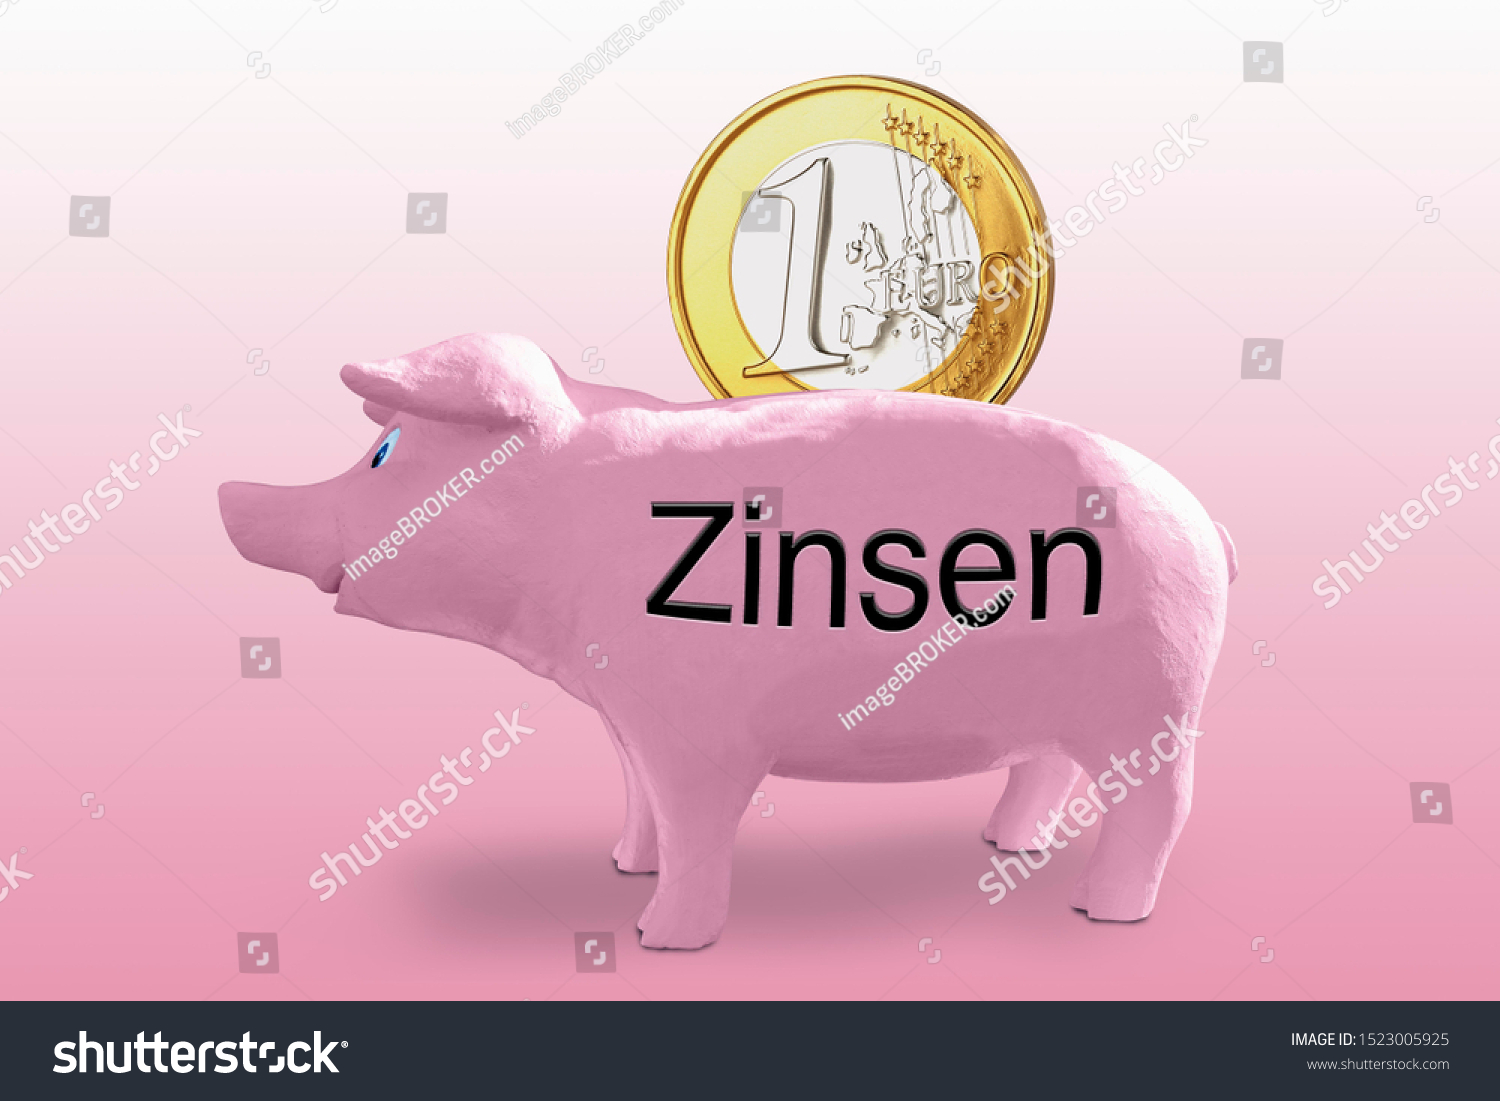 Large one euro coin in a pink piggy bank labelled Zinsen, German for interest rates, symbolic image #1523005925